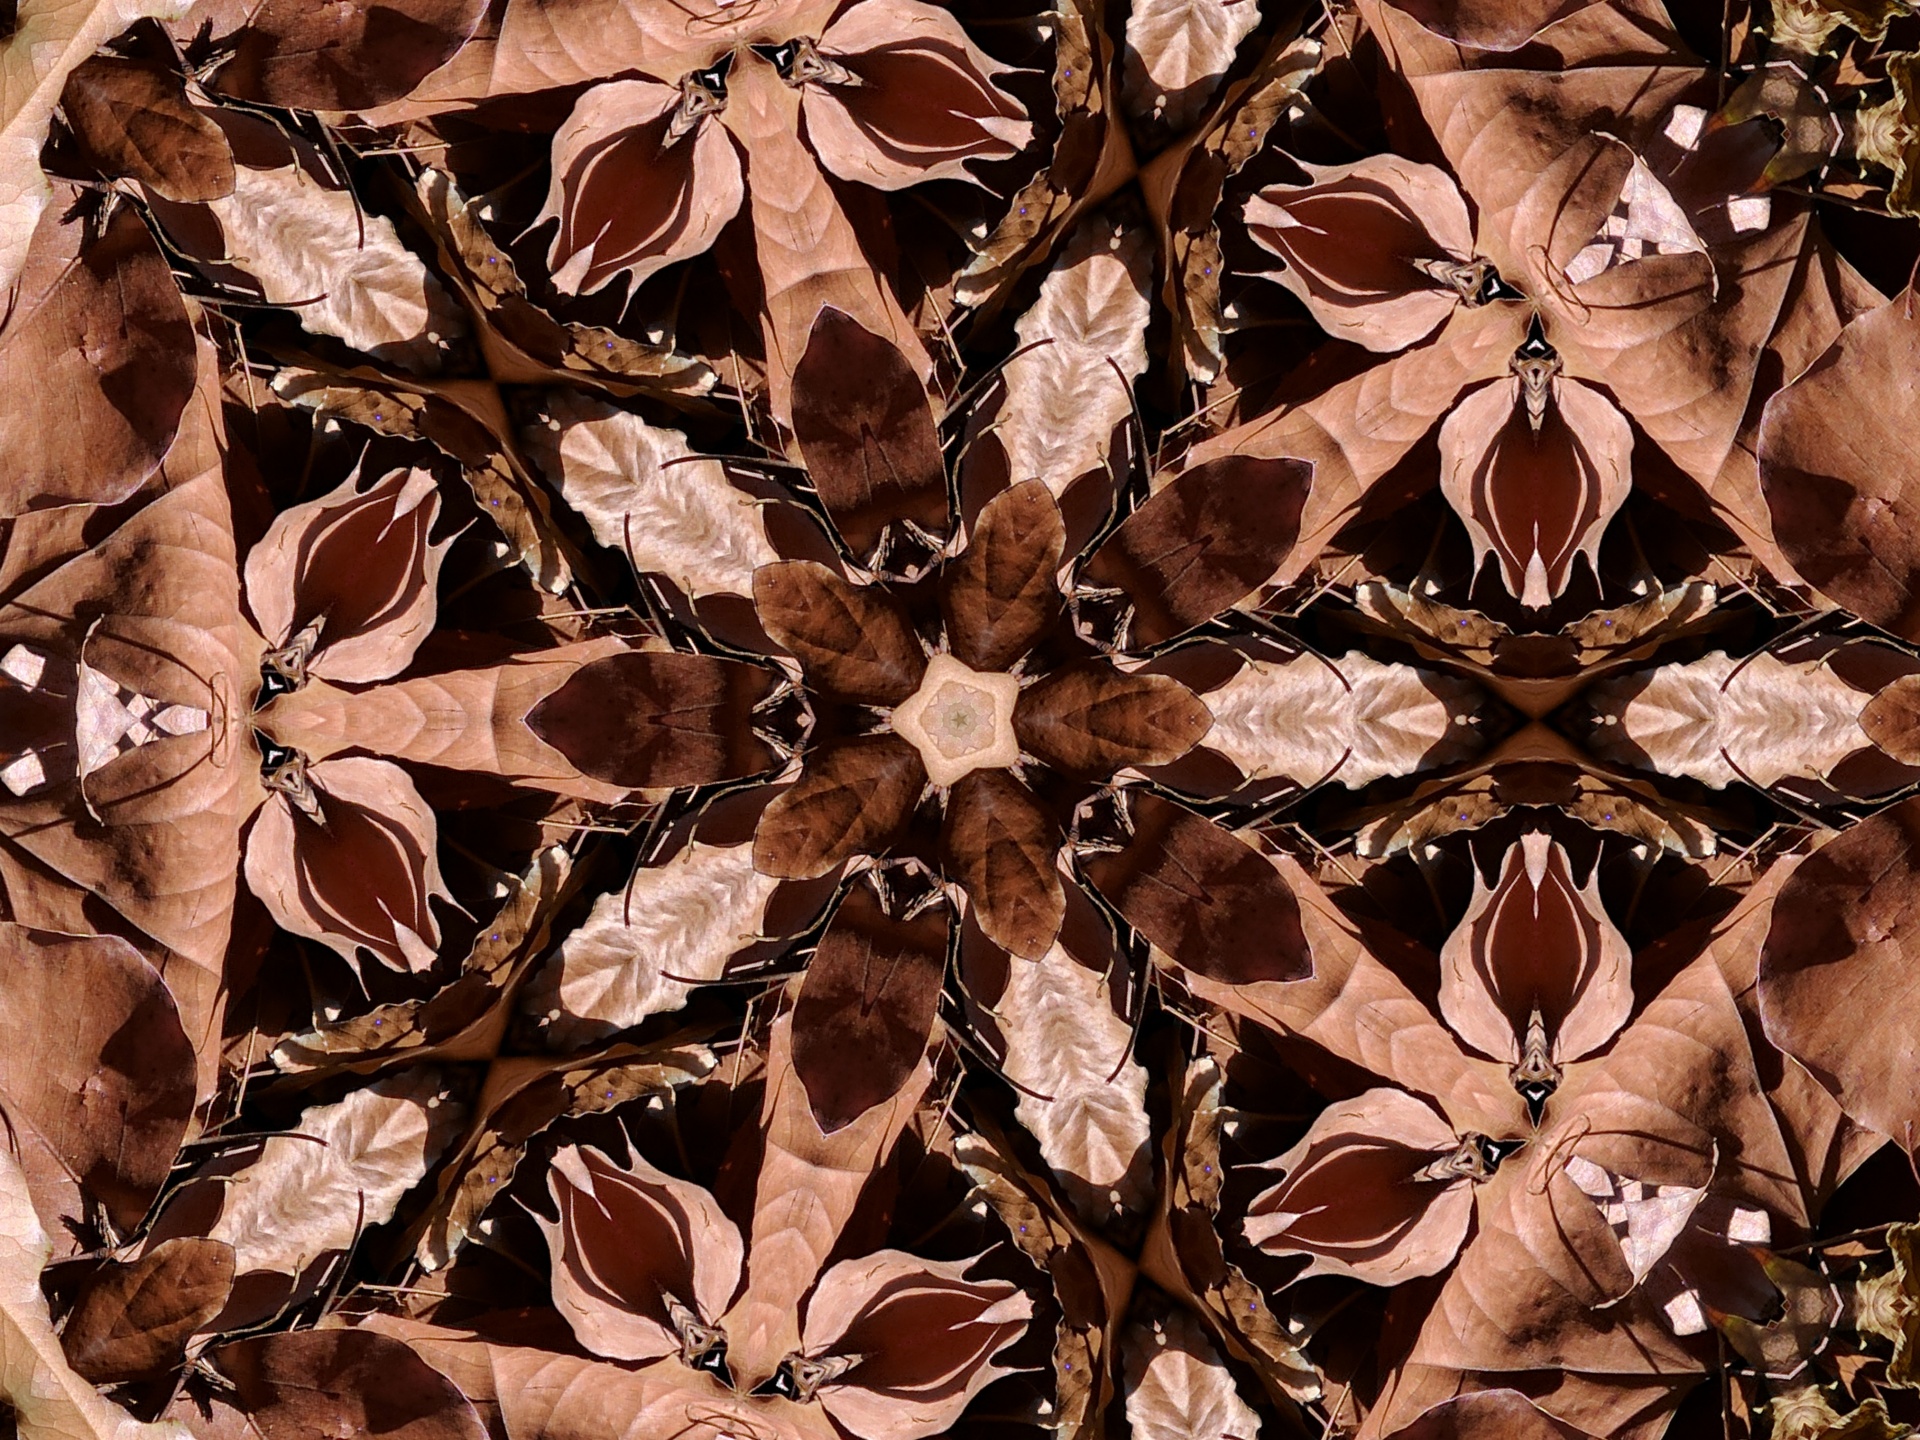 Kaleidoscope created from photo of brown autumn leaves